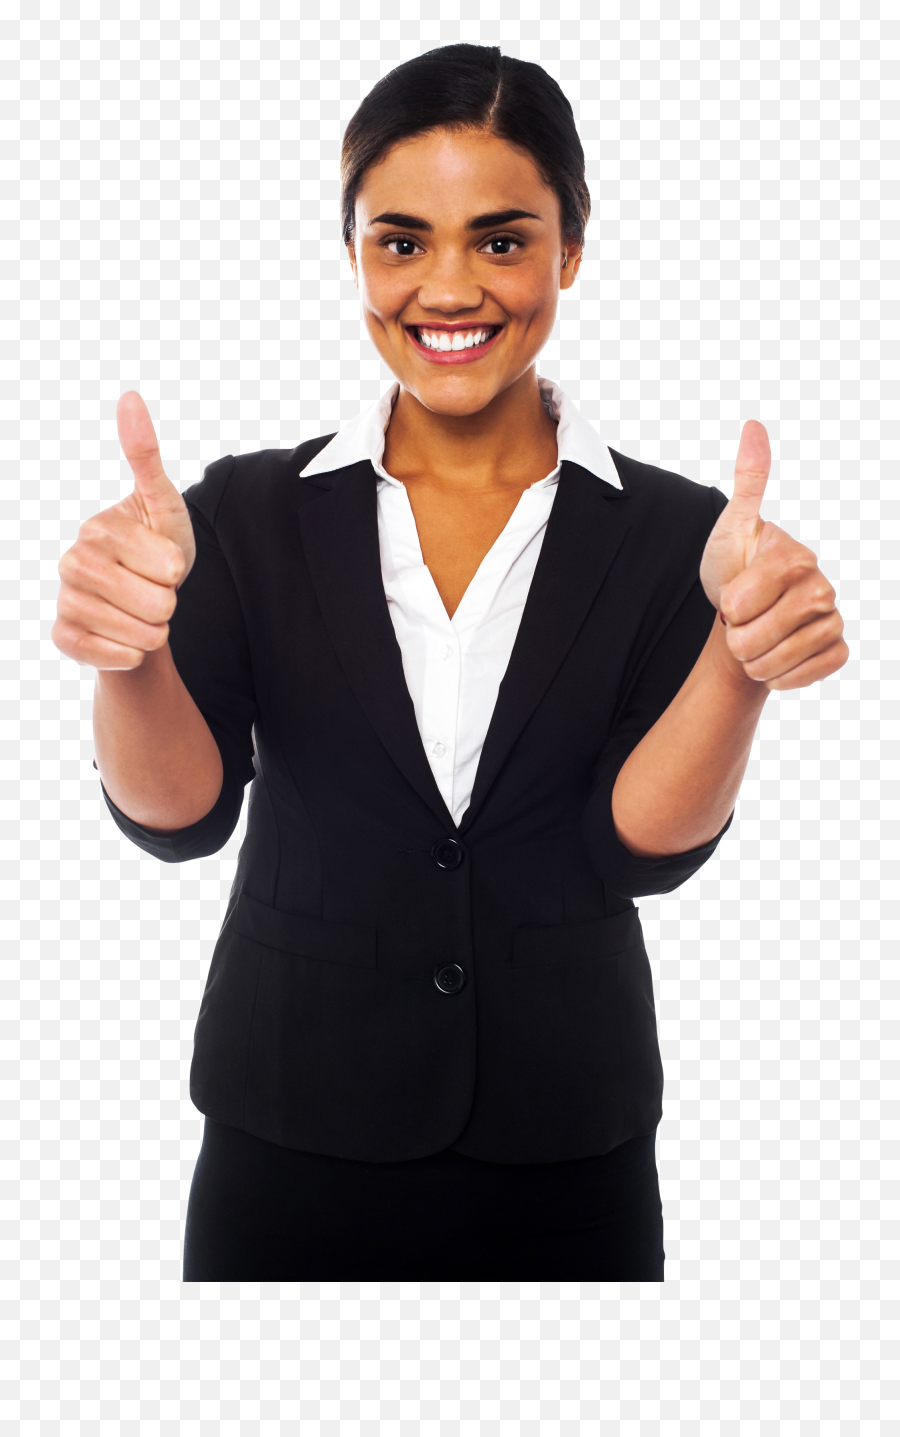 Pointing Thumbs Up Png Image For Free - Woman Thumbs Up,Thumb Up Png